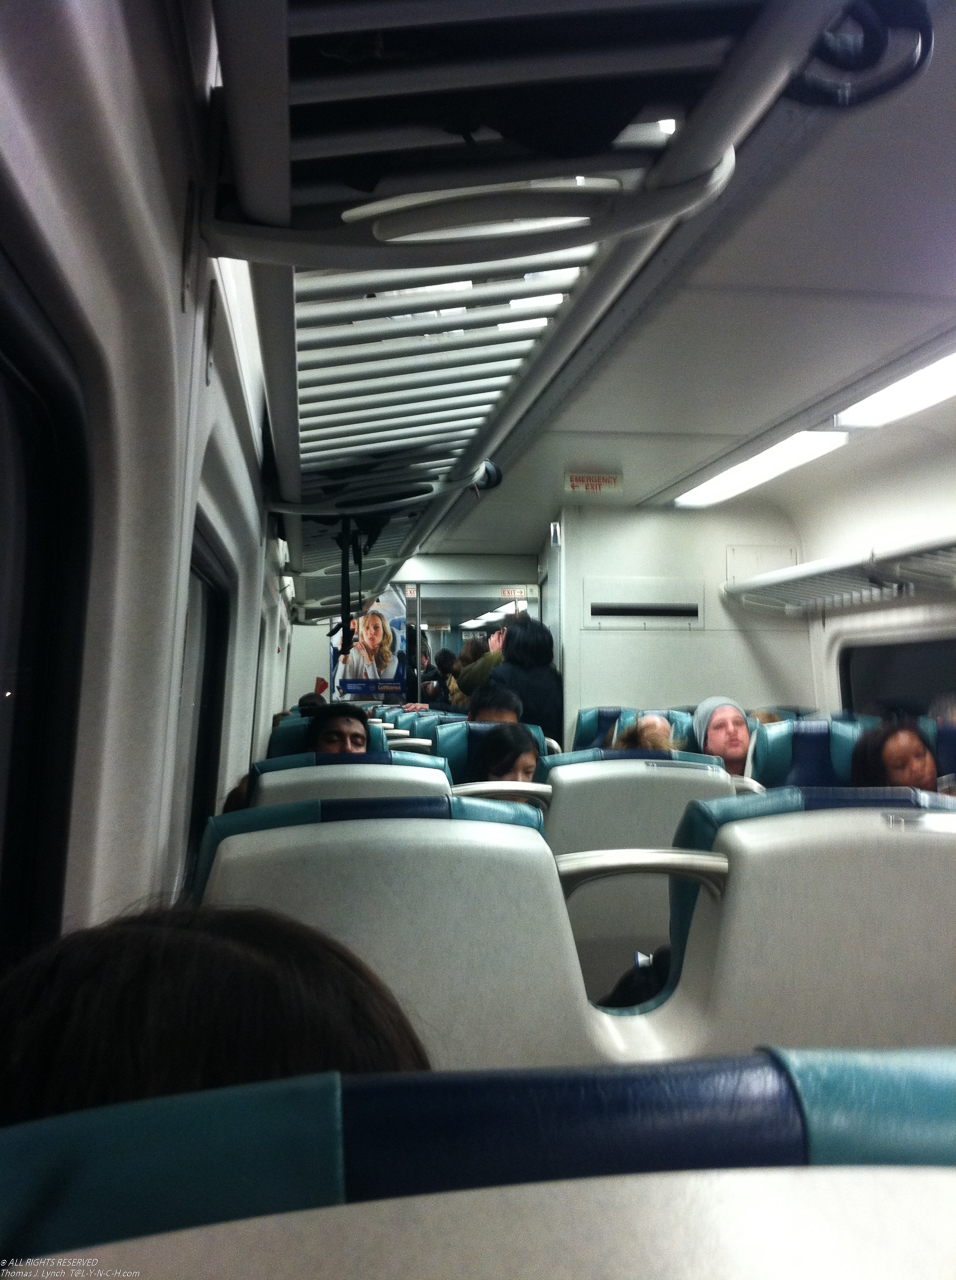 Packed train......another day on the LIRR.  ~~  